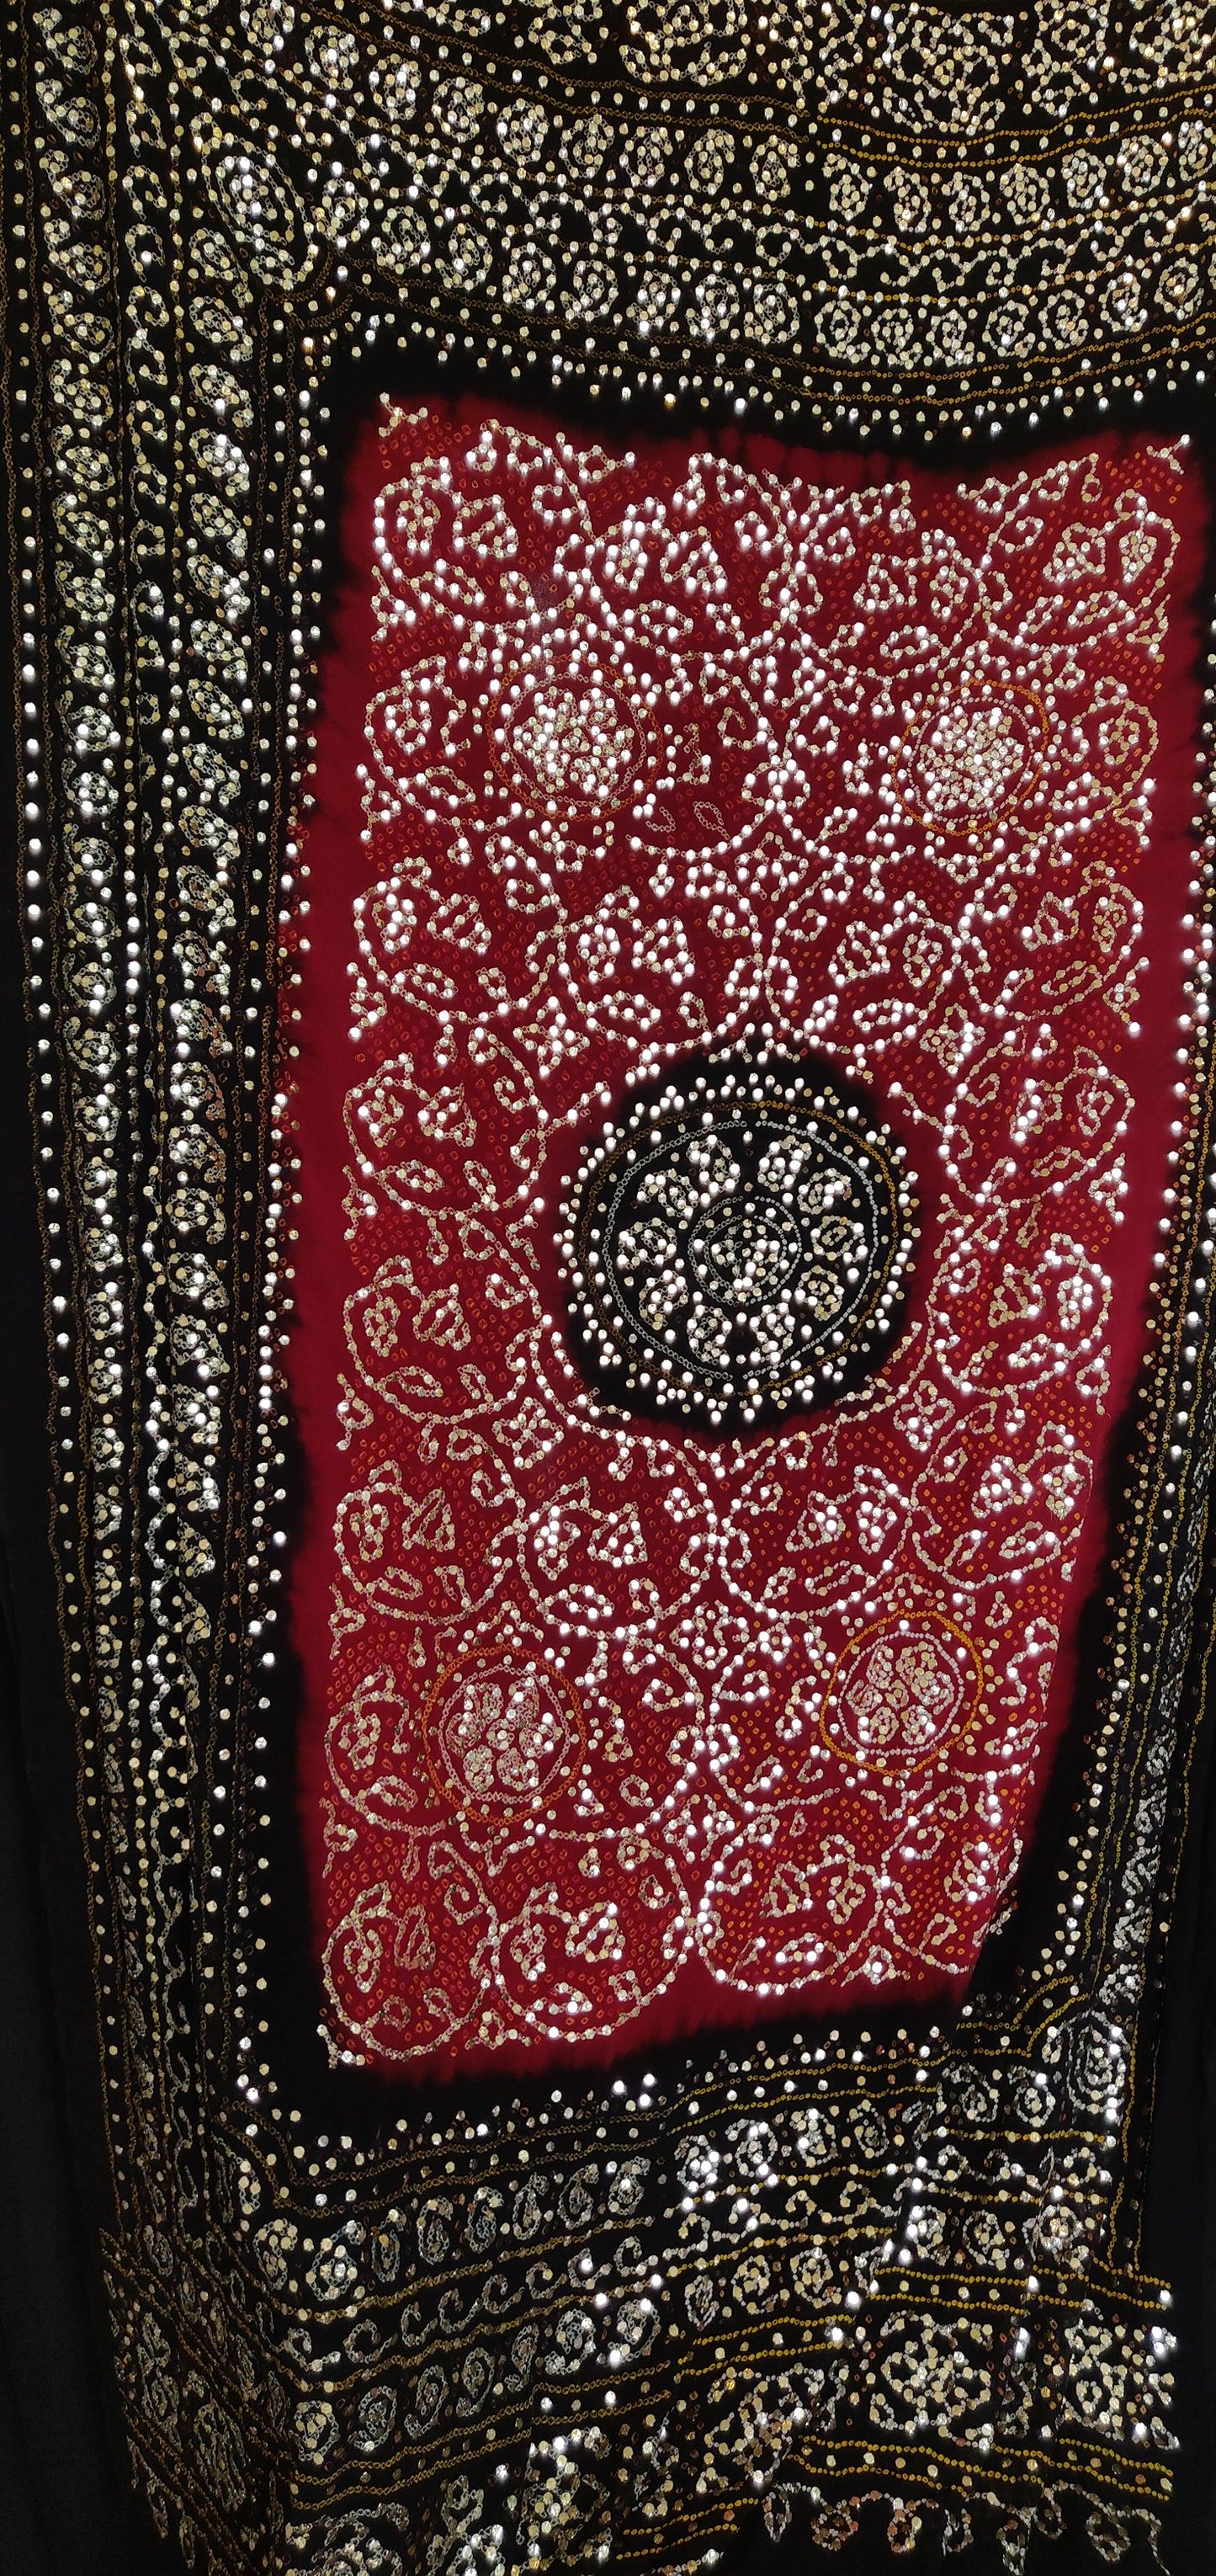 Black and Red pure georgette bandhej dupatta with heavy mukaish work